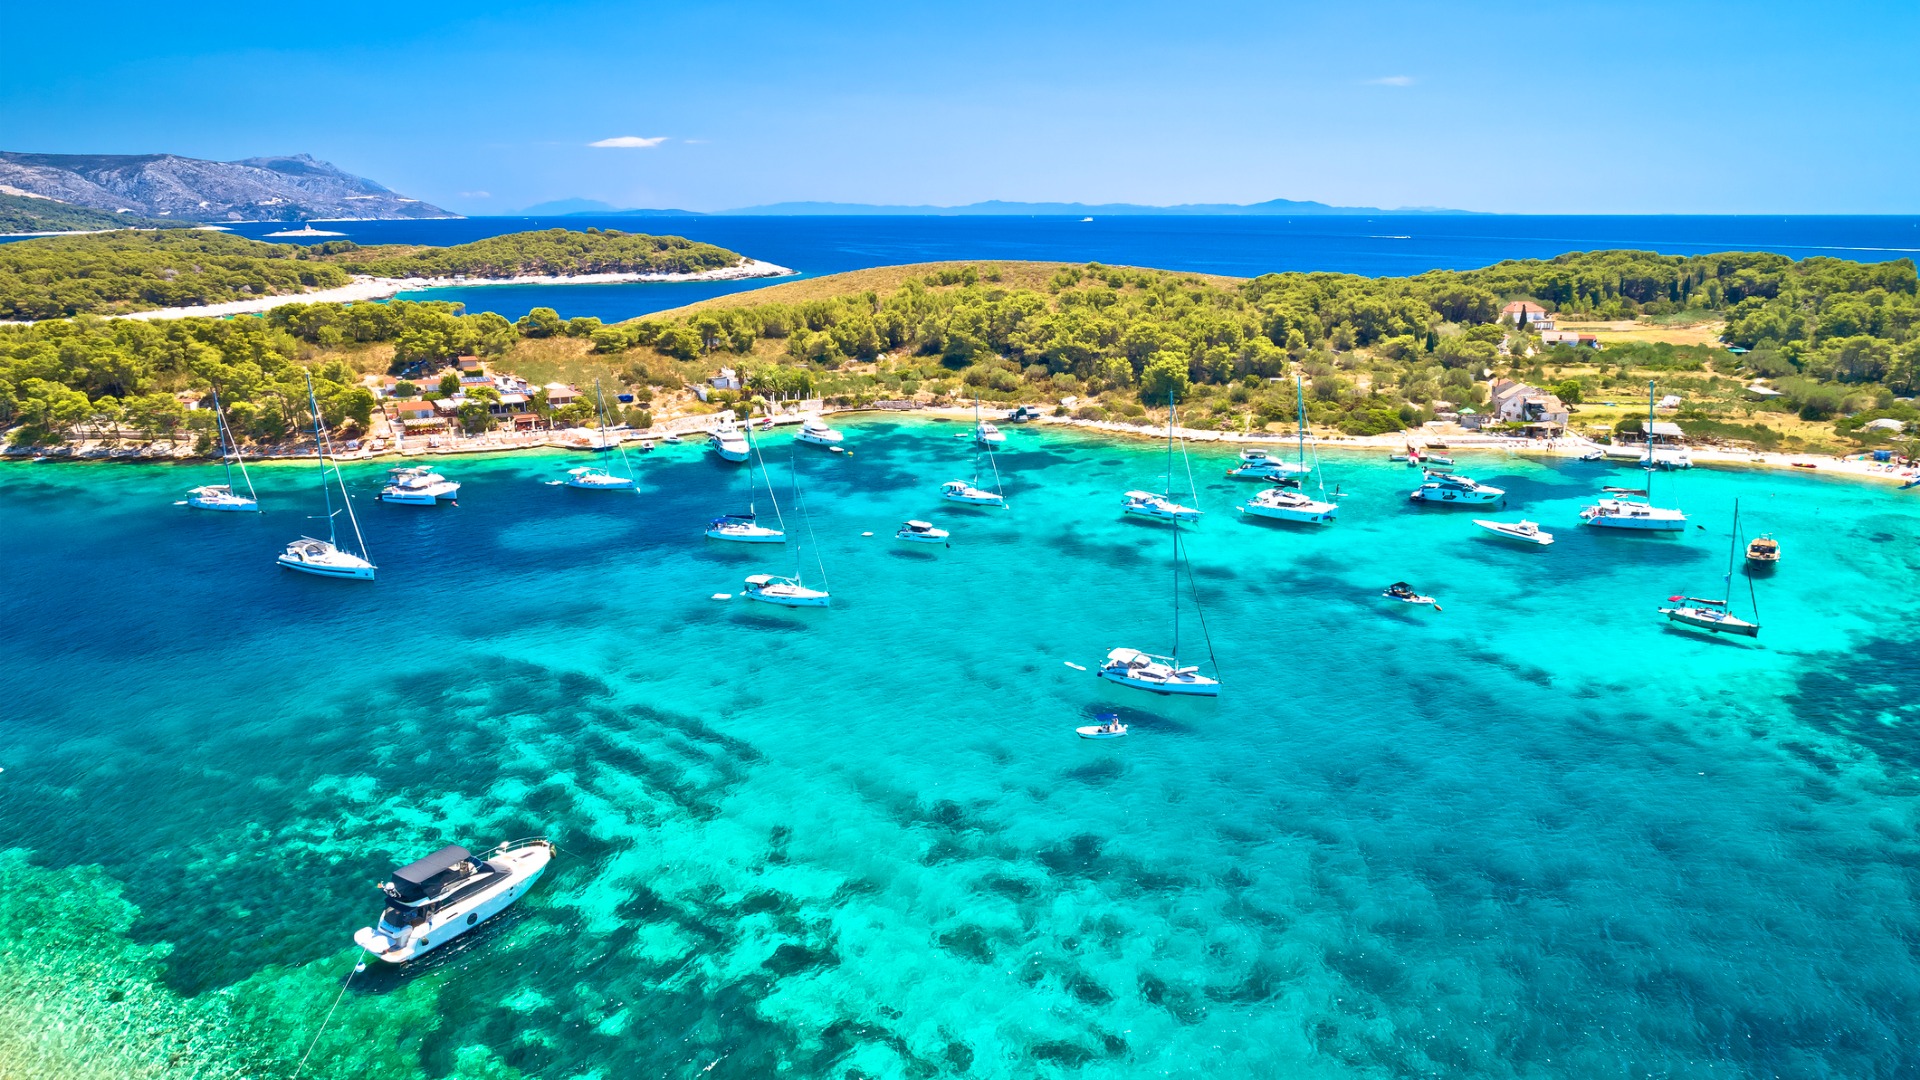 This image shows the transparent turquoise waters of Marinkovac Island. There are many sailing boats.